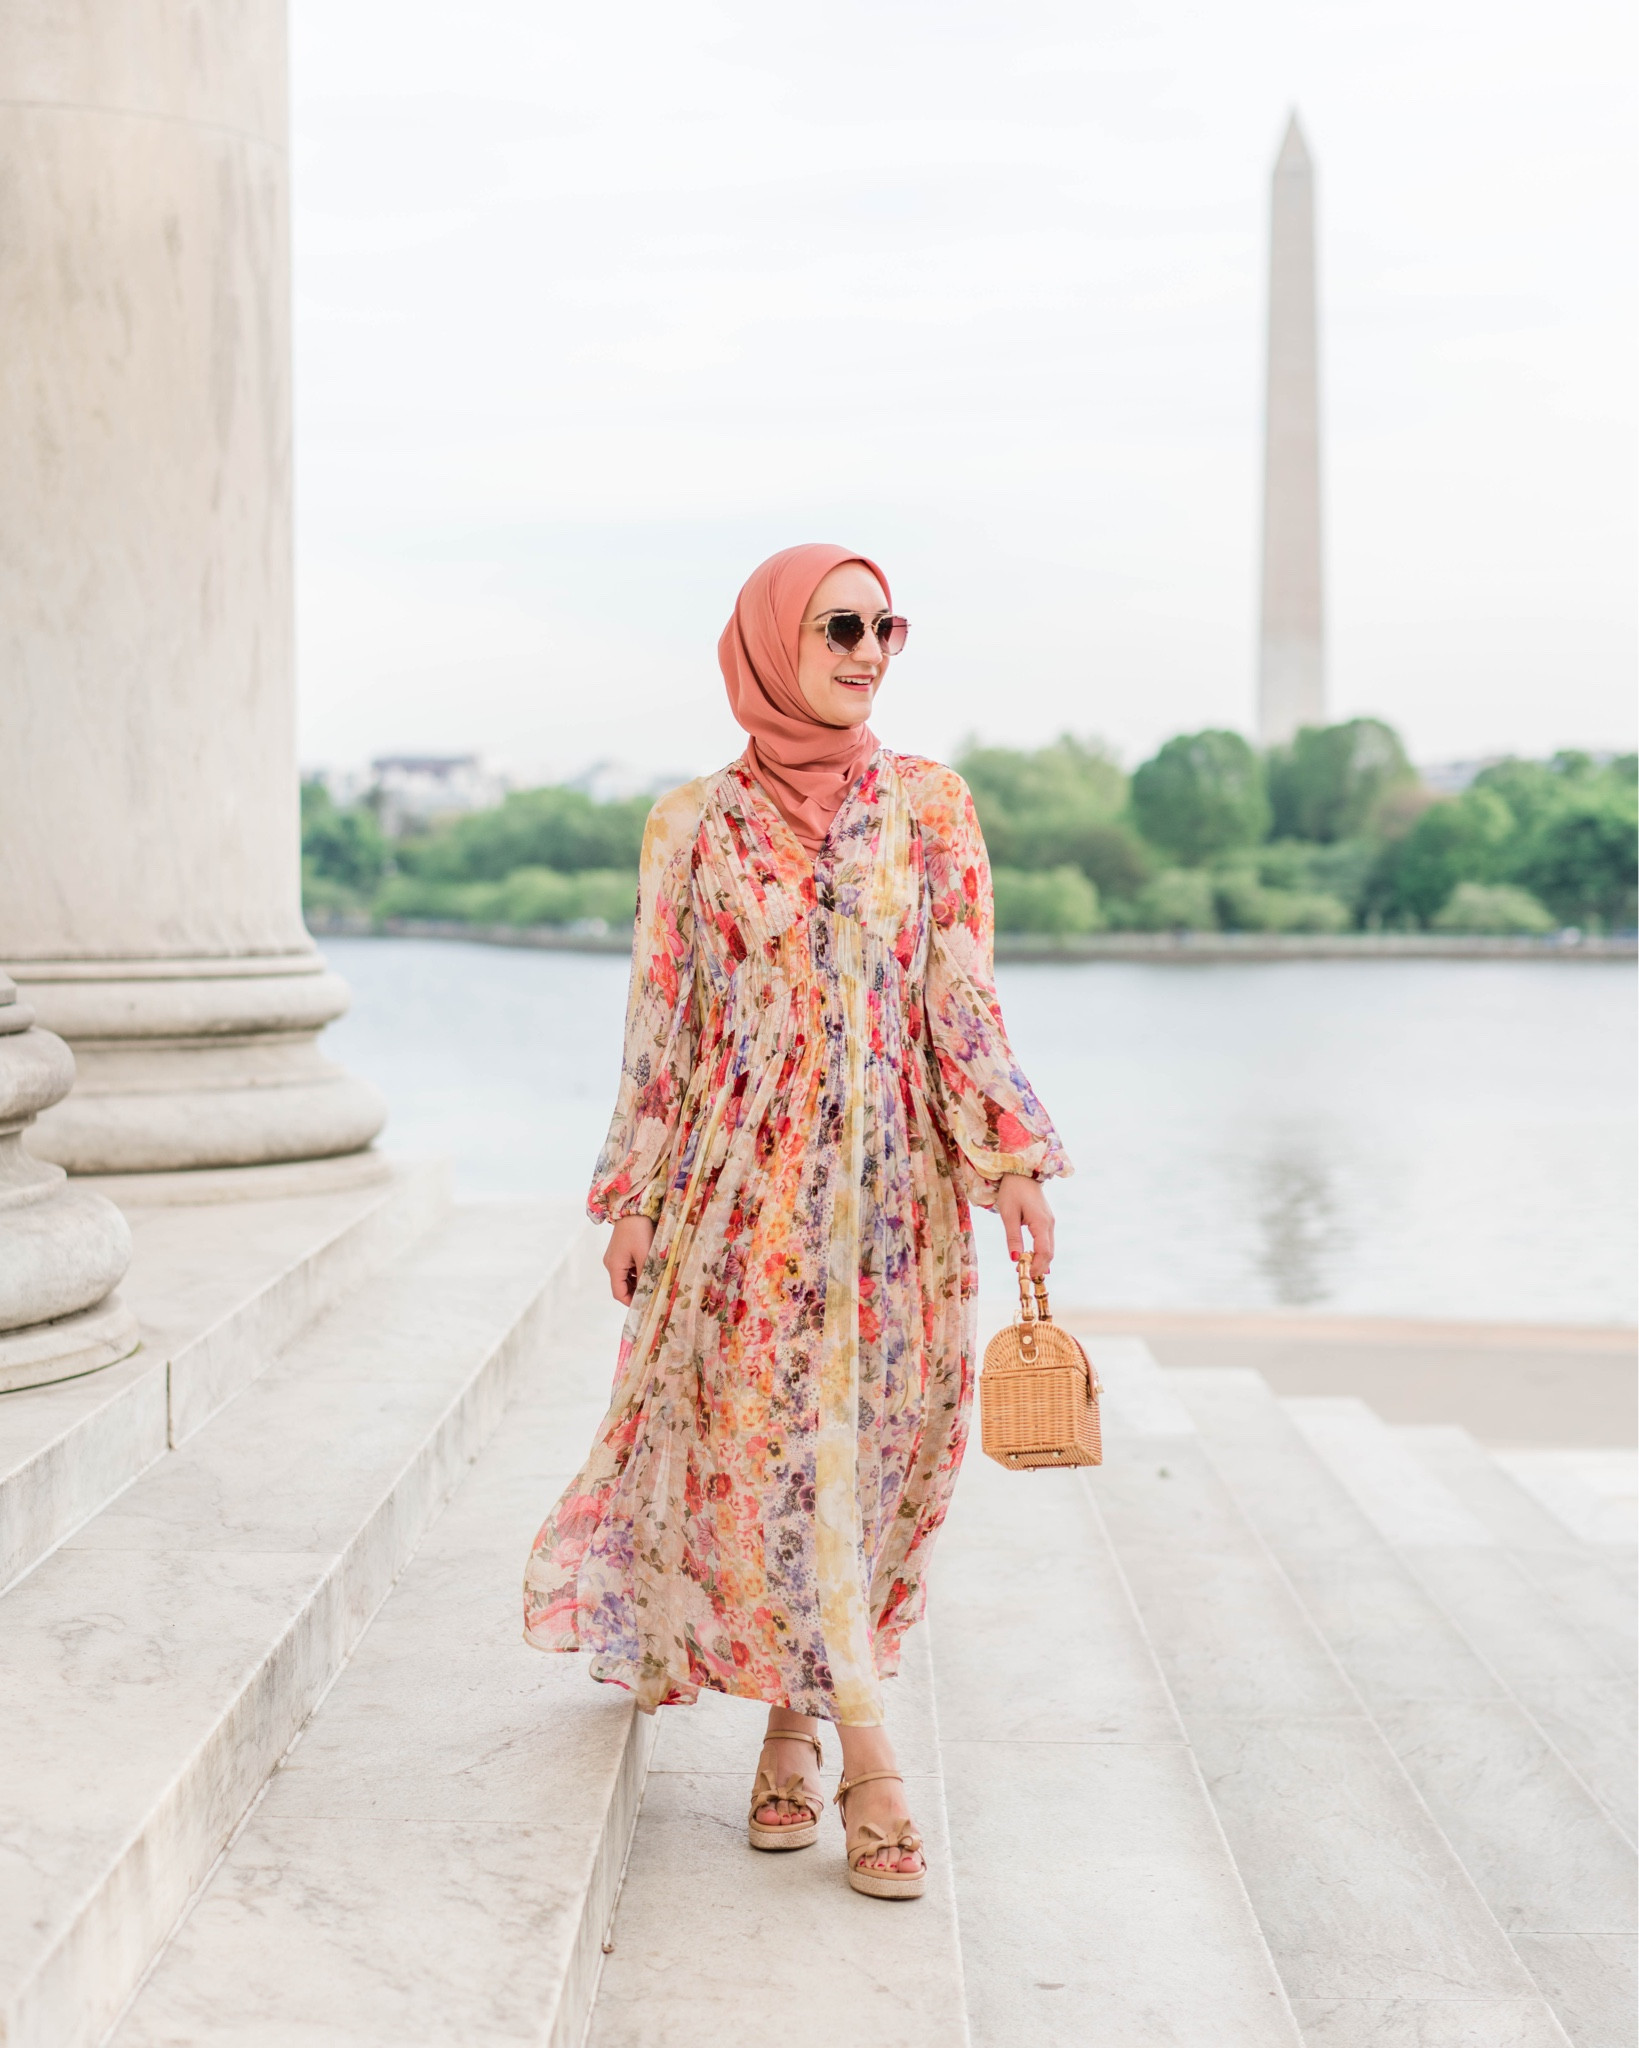 Elegance :: Pleated Maxi Skirt at the Jefferson Memorial - Color